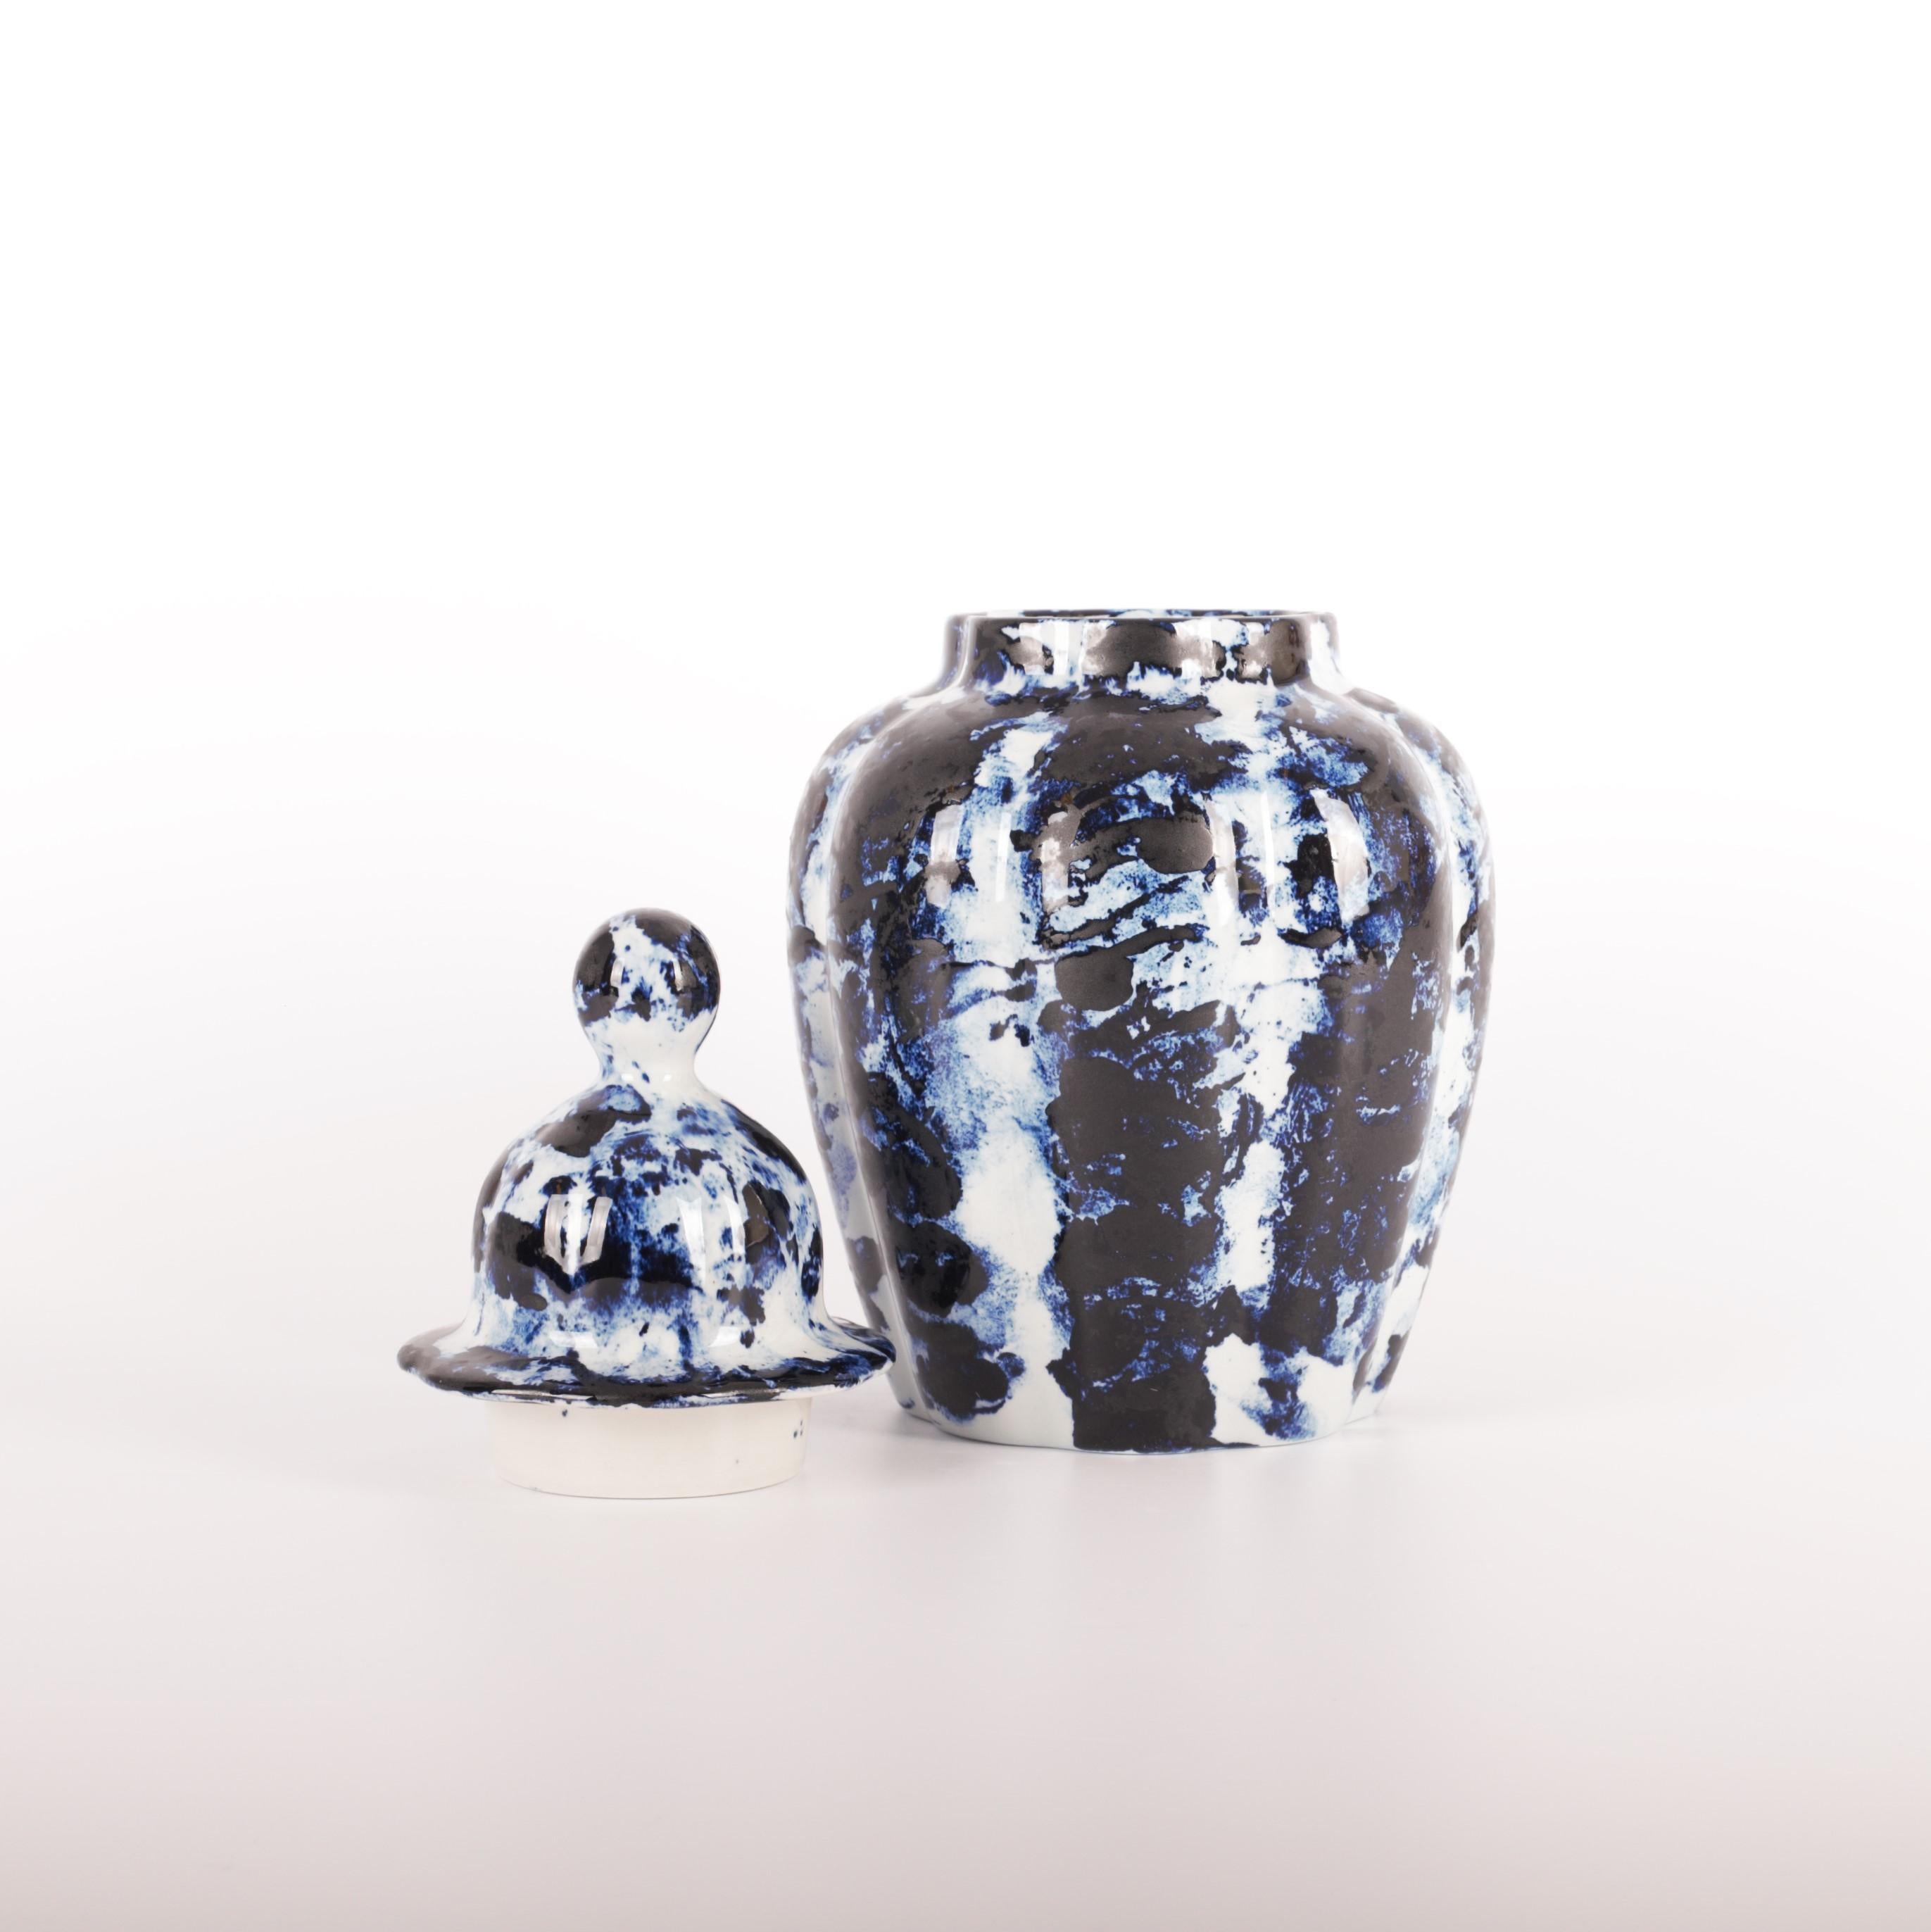 Glazed Delft Blue Vase with Lid #2, by Marcel Wanders, Hand Painted, 2006, Unique For Sale